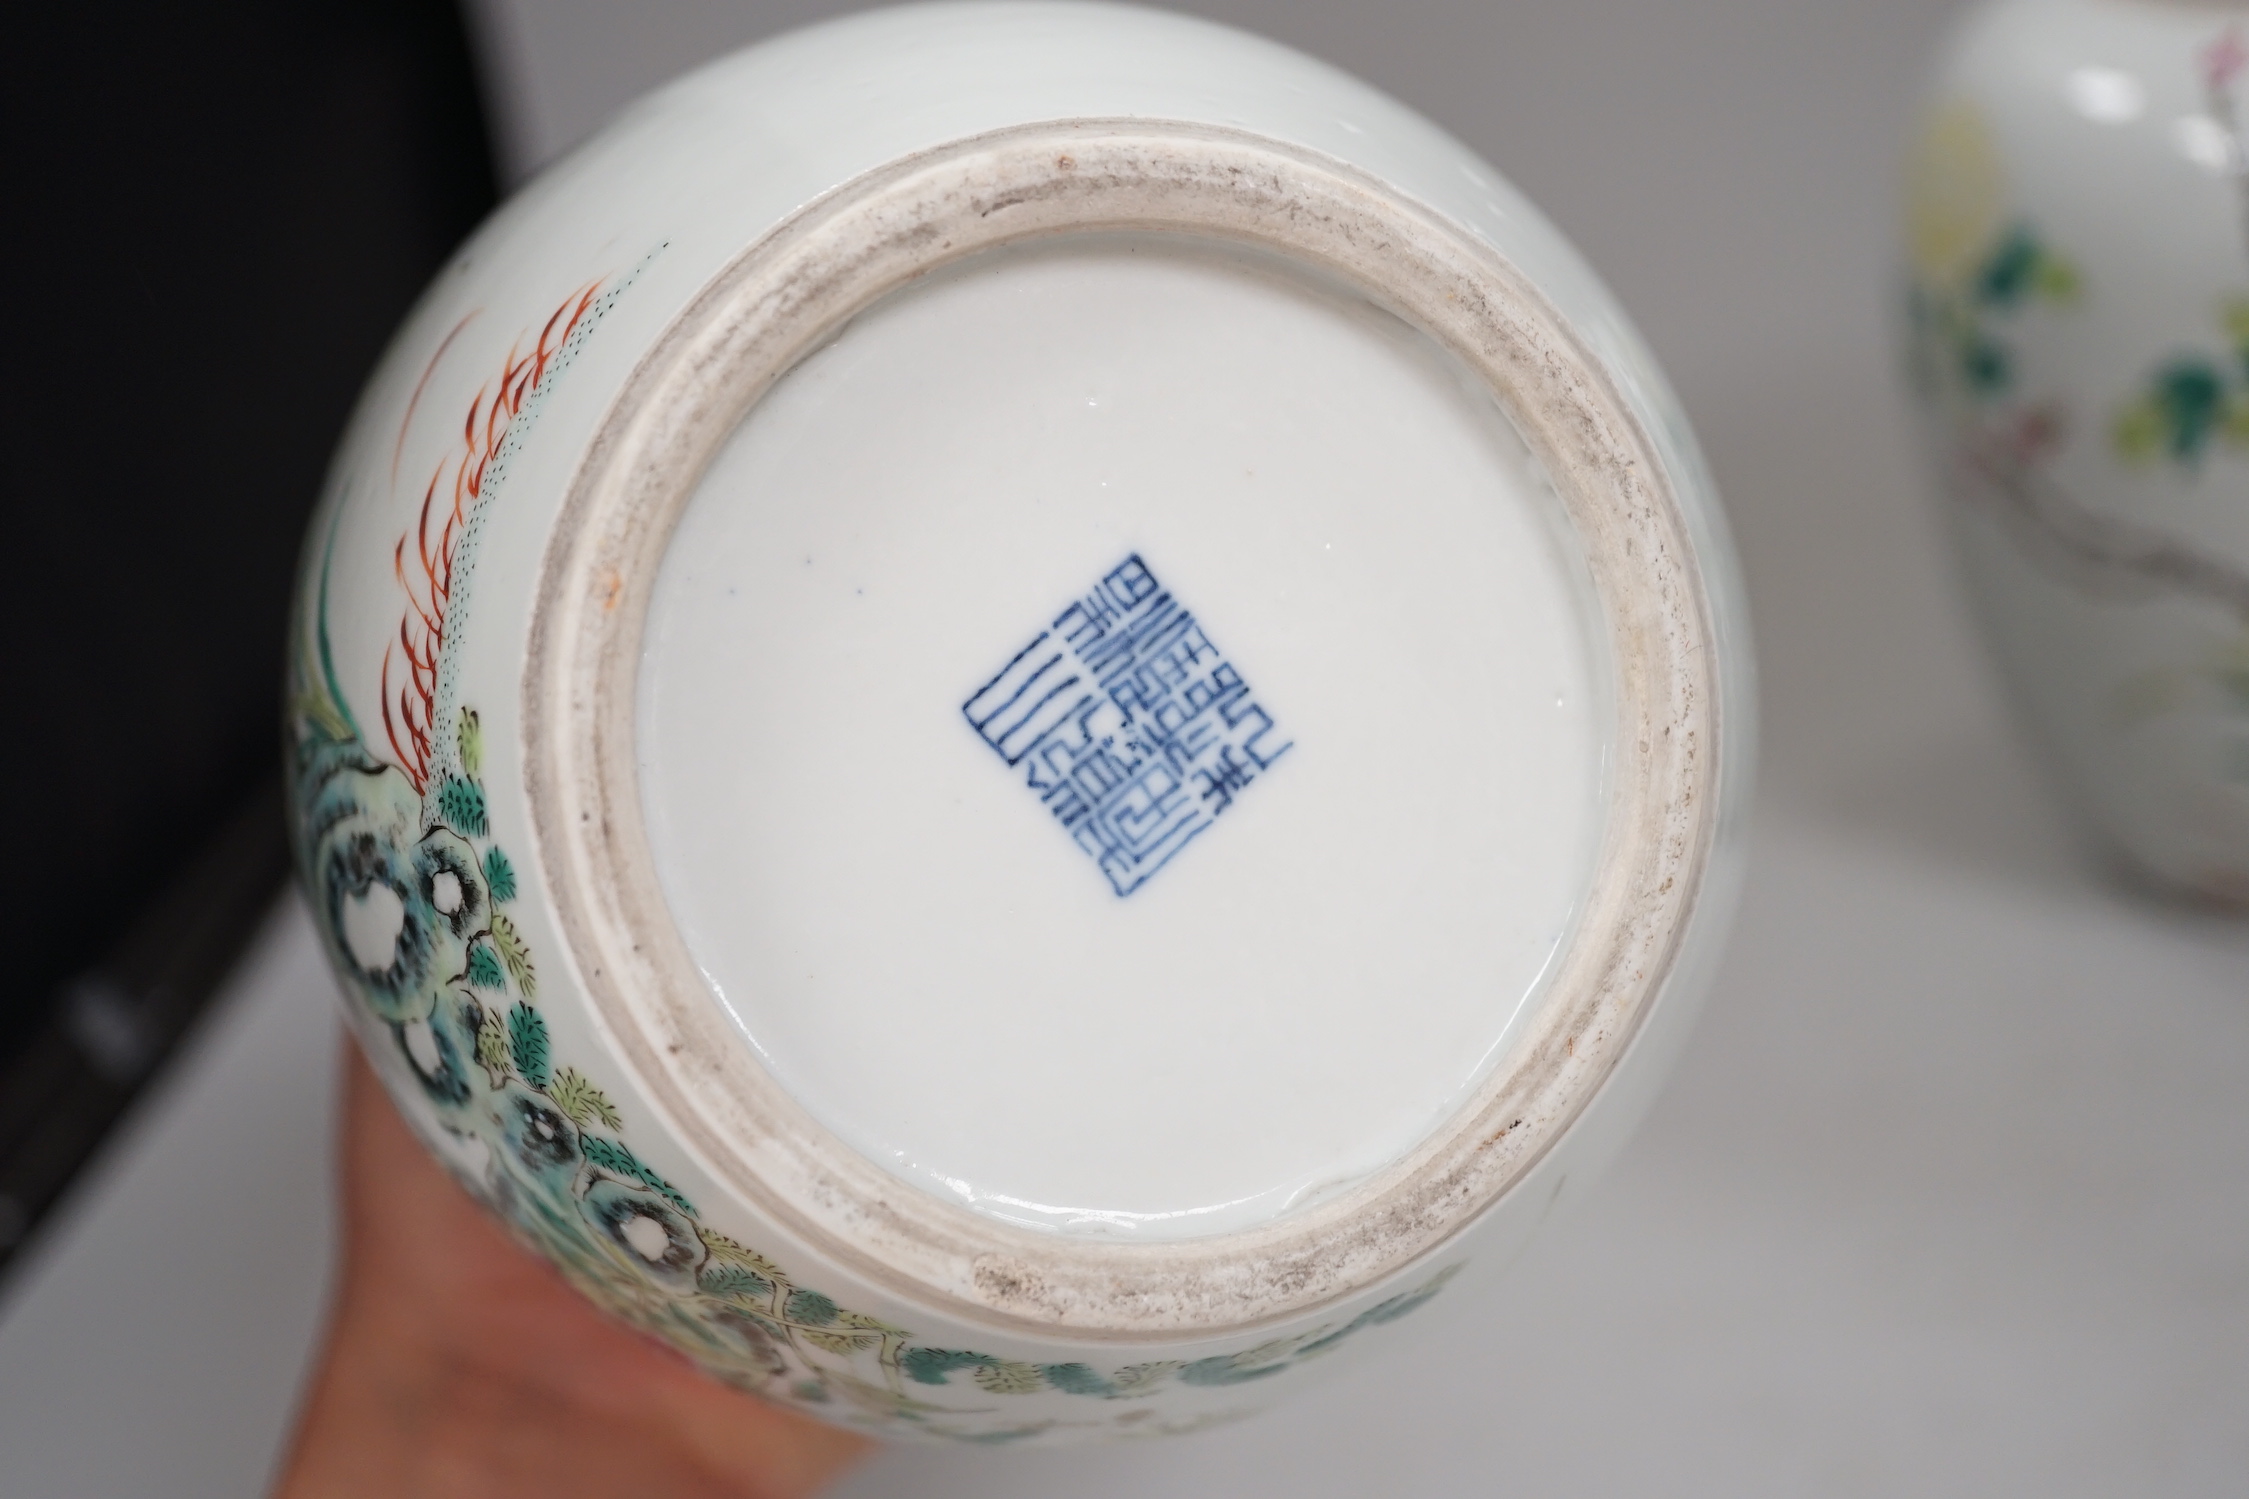 A pair of Chinese famille rose jars and covers, Qianlong seal marks, late 19th century, 20cm high